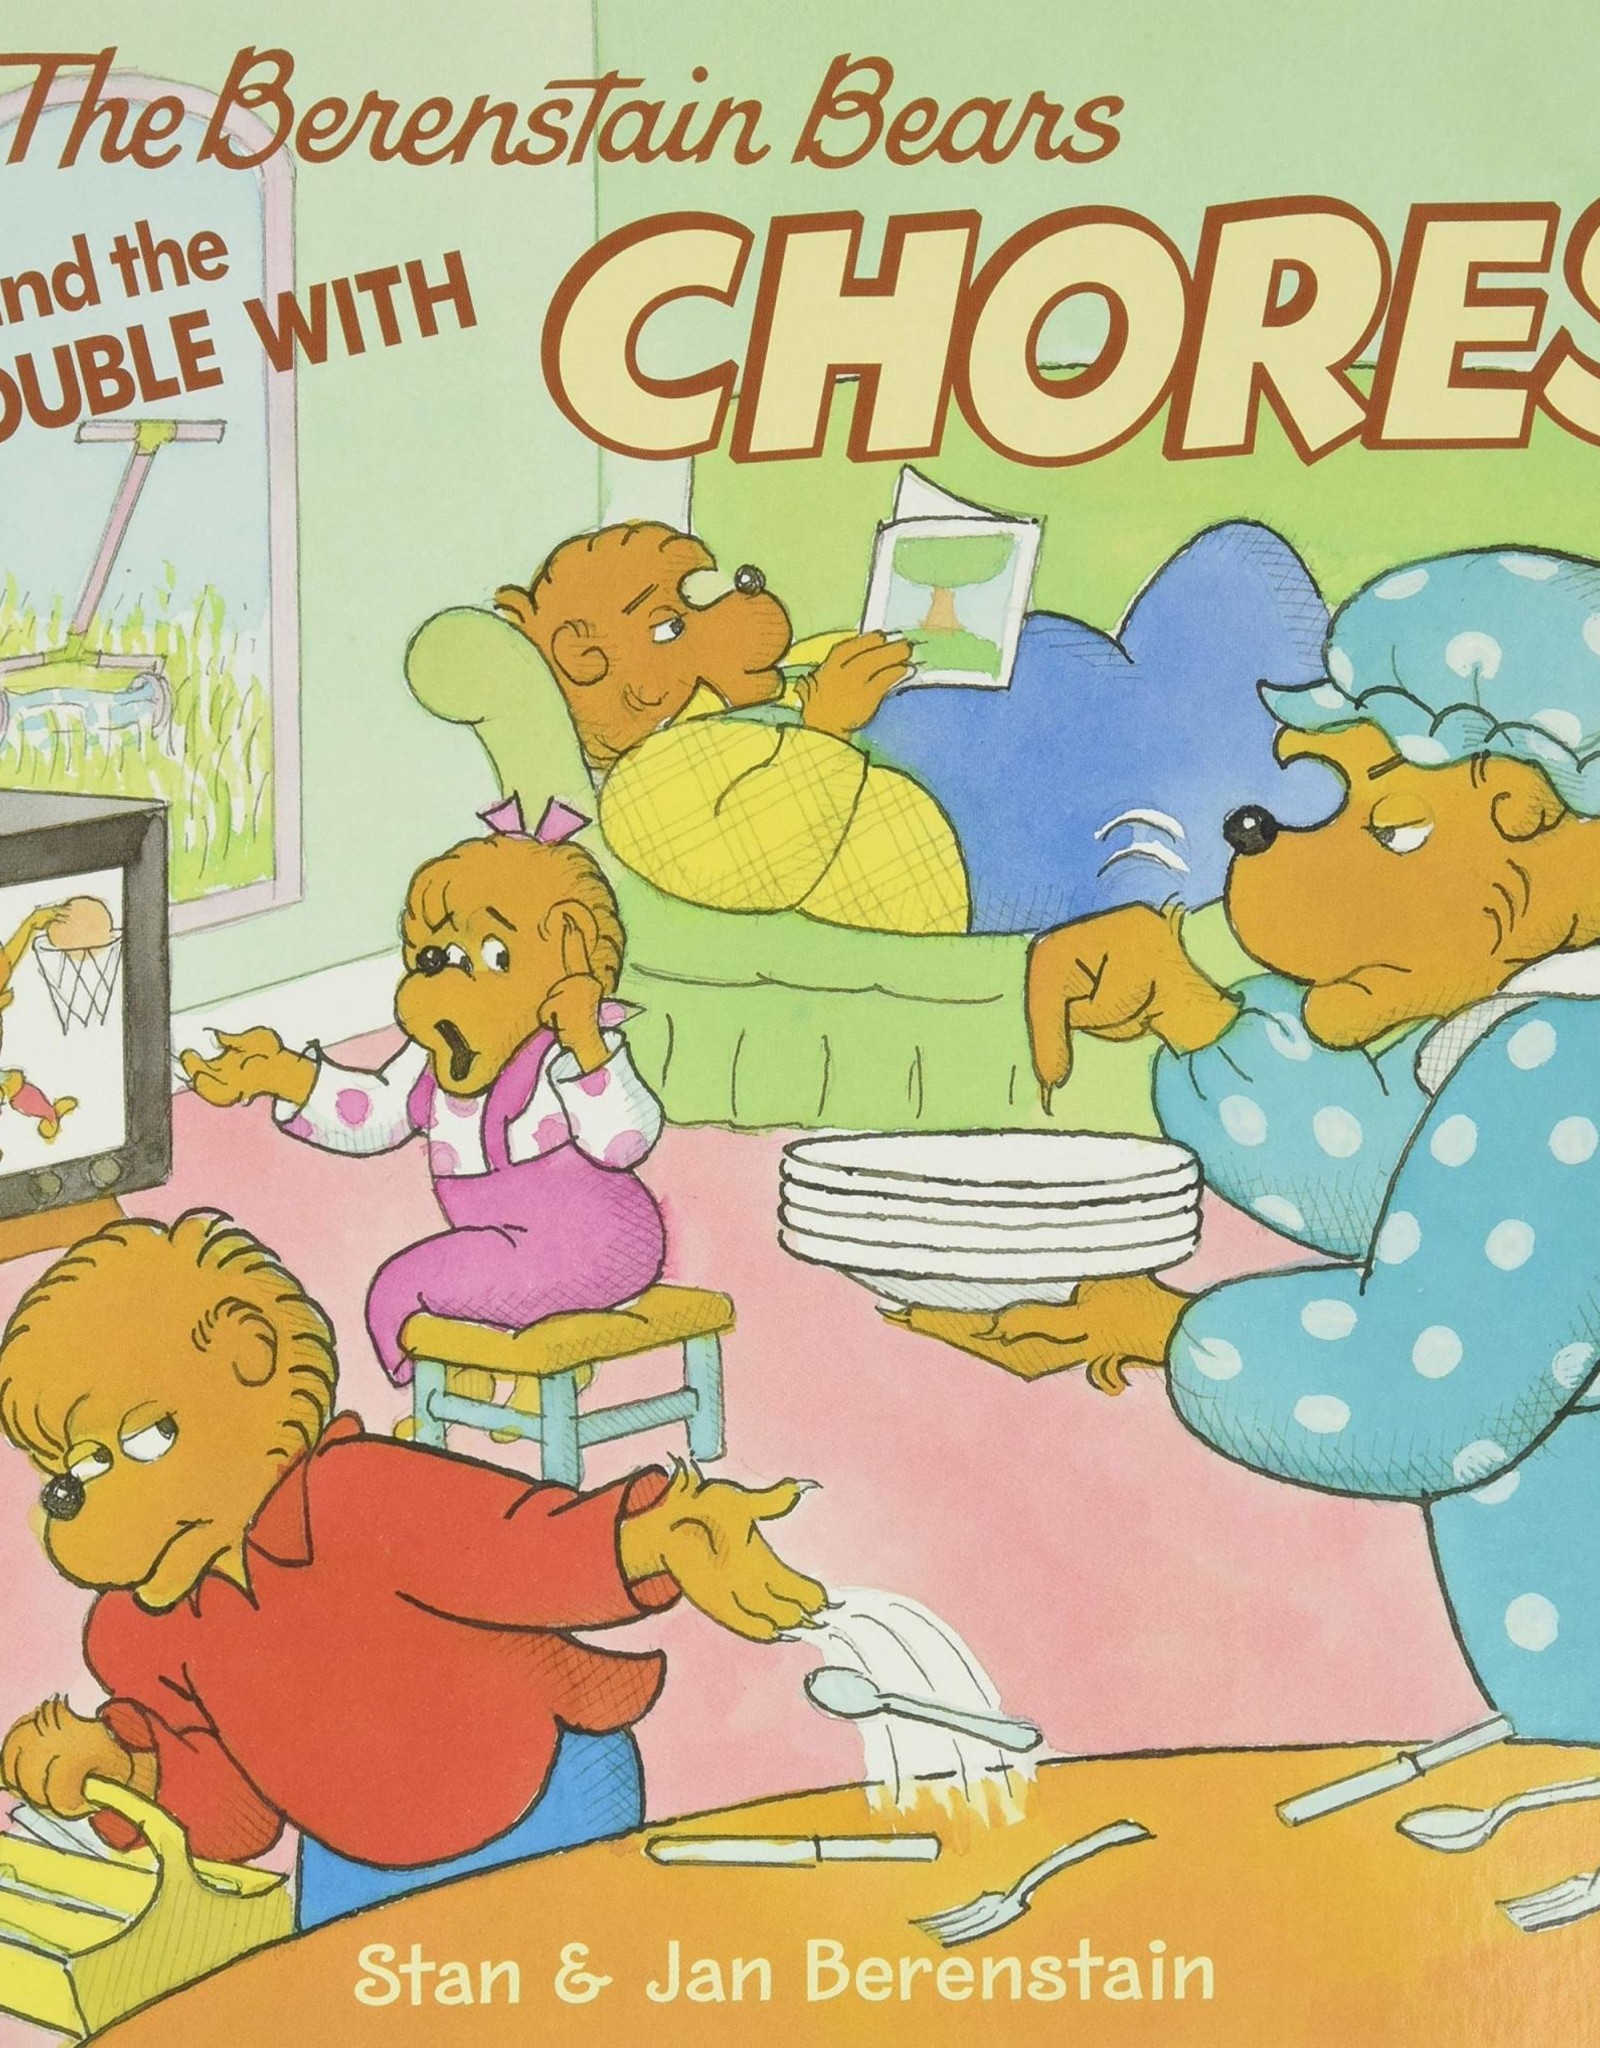 Berenstain Bears and the Trouble with Chores